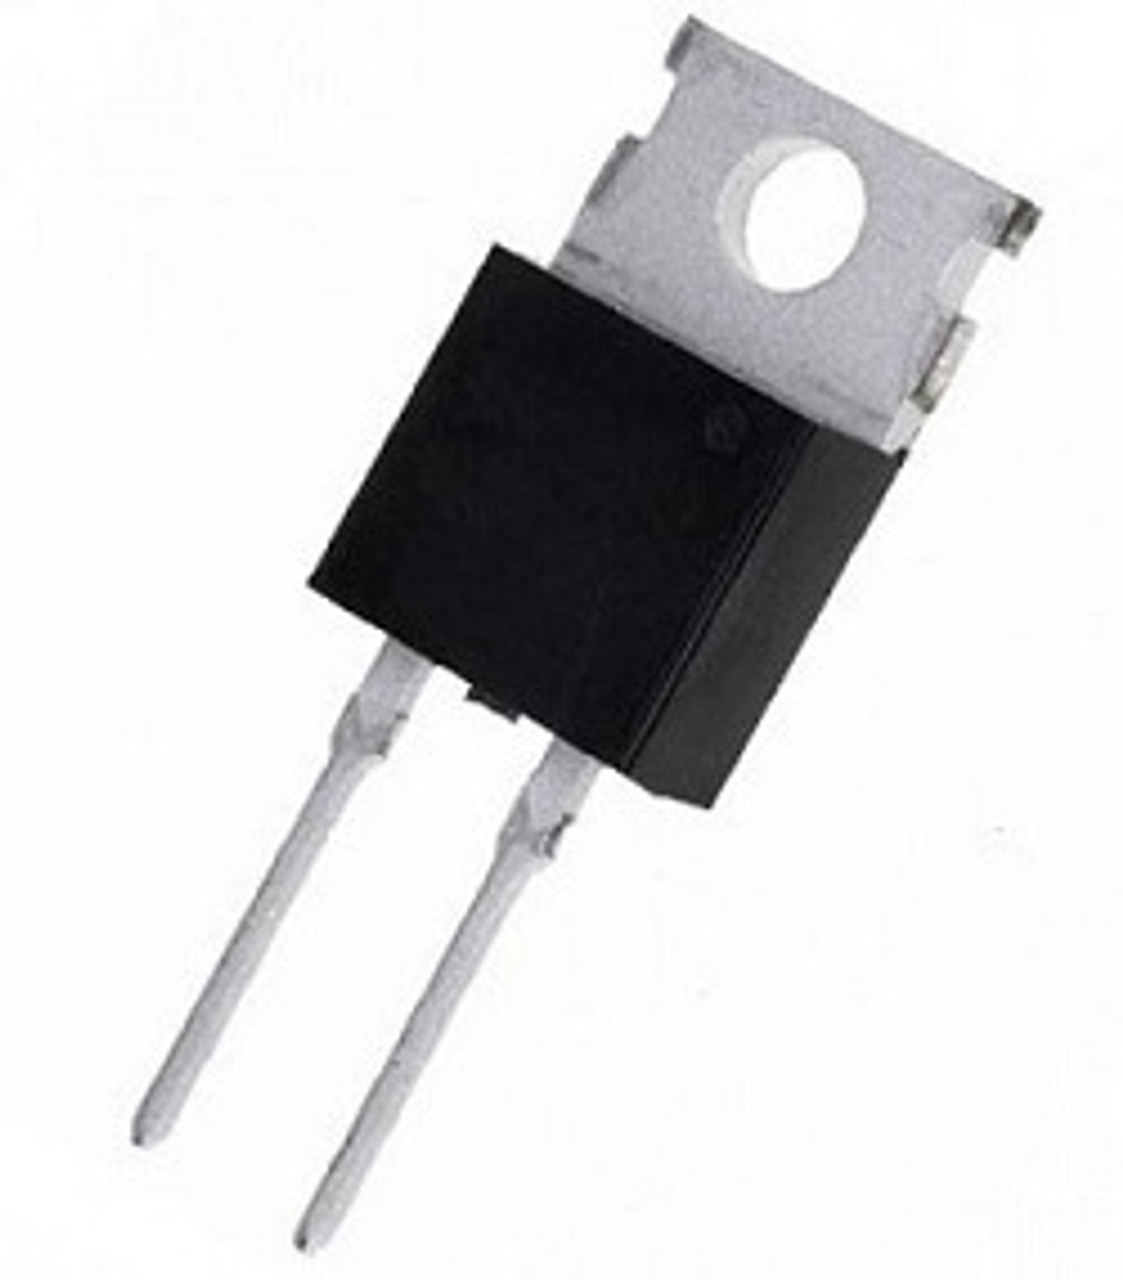 BY459-1500 ; Single Fast Diode 1500V 12A 170ns, TO-220-2